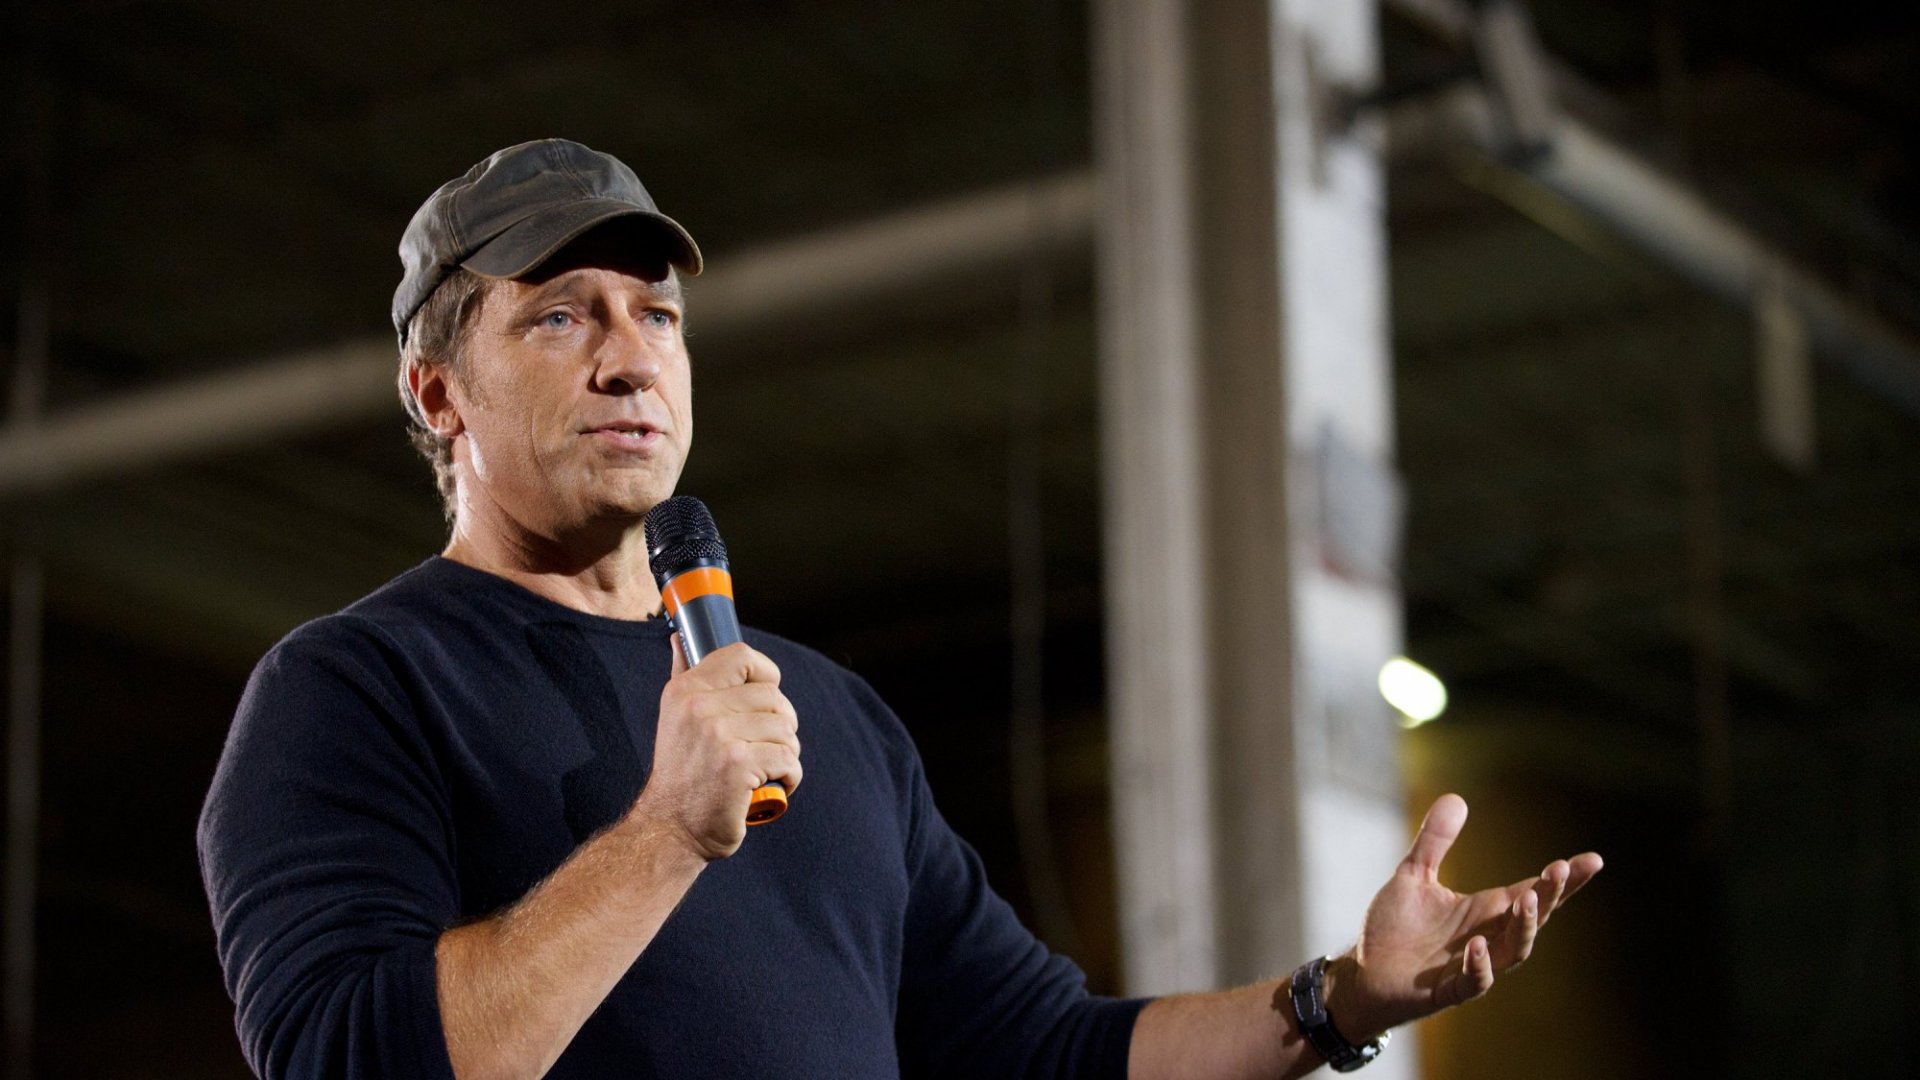 Mike Rowe wearing a black t-shirt and a face cap holing a mic while speaking